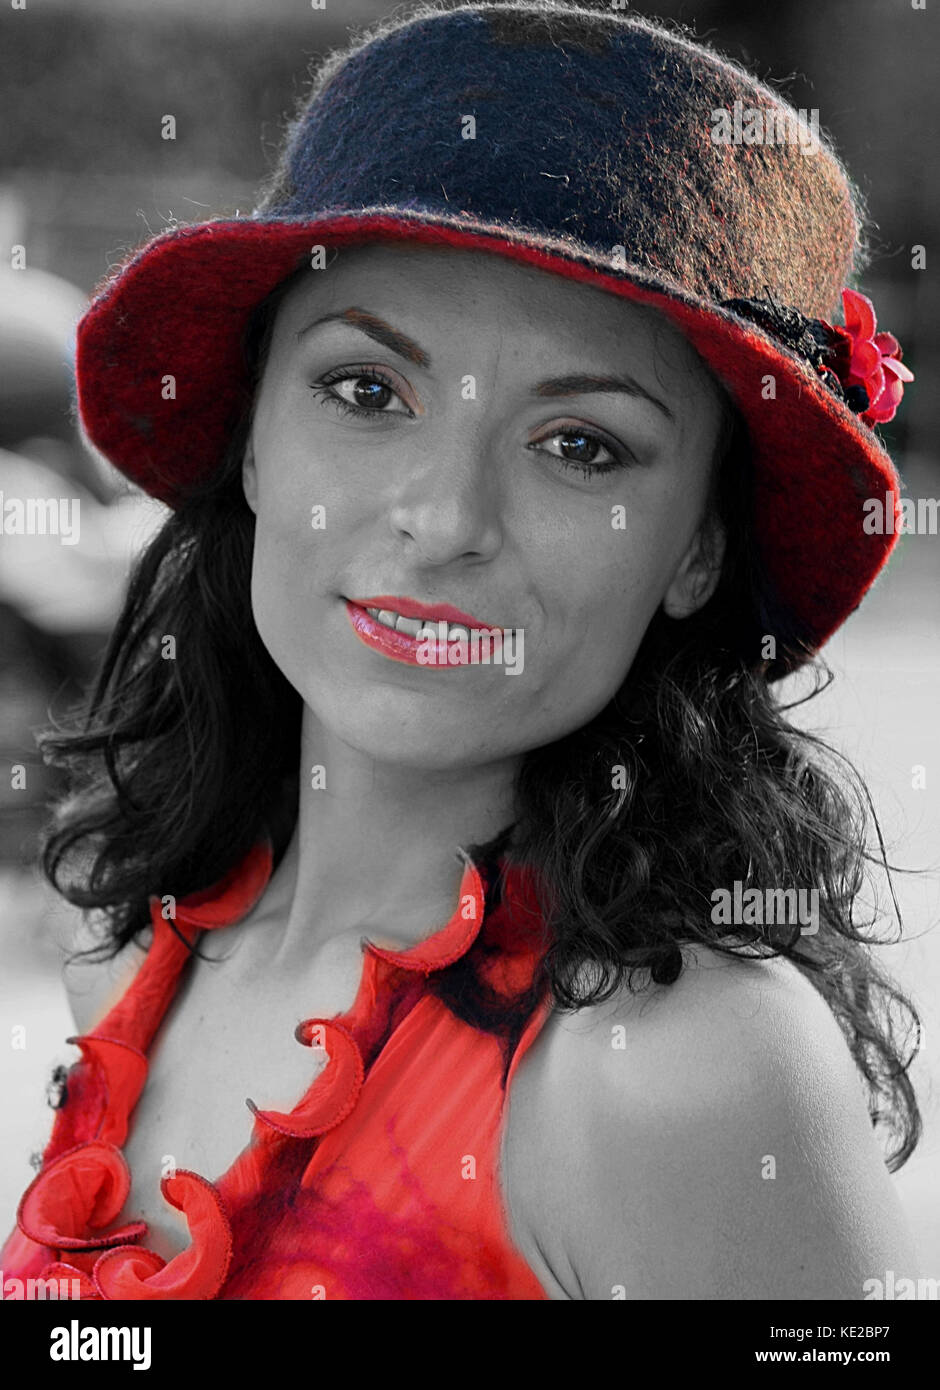 Portrait of girl with red hat Stock Photo